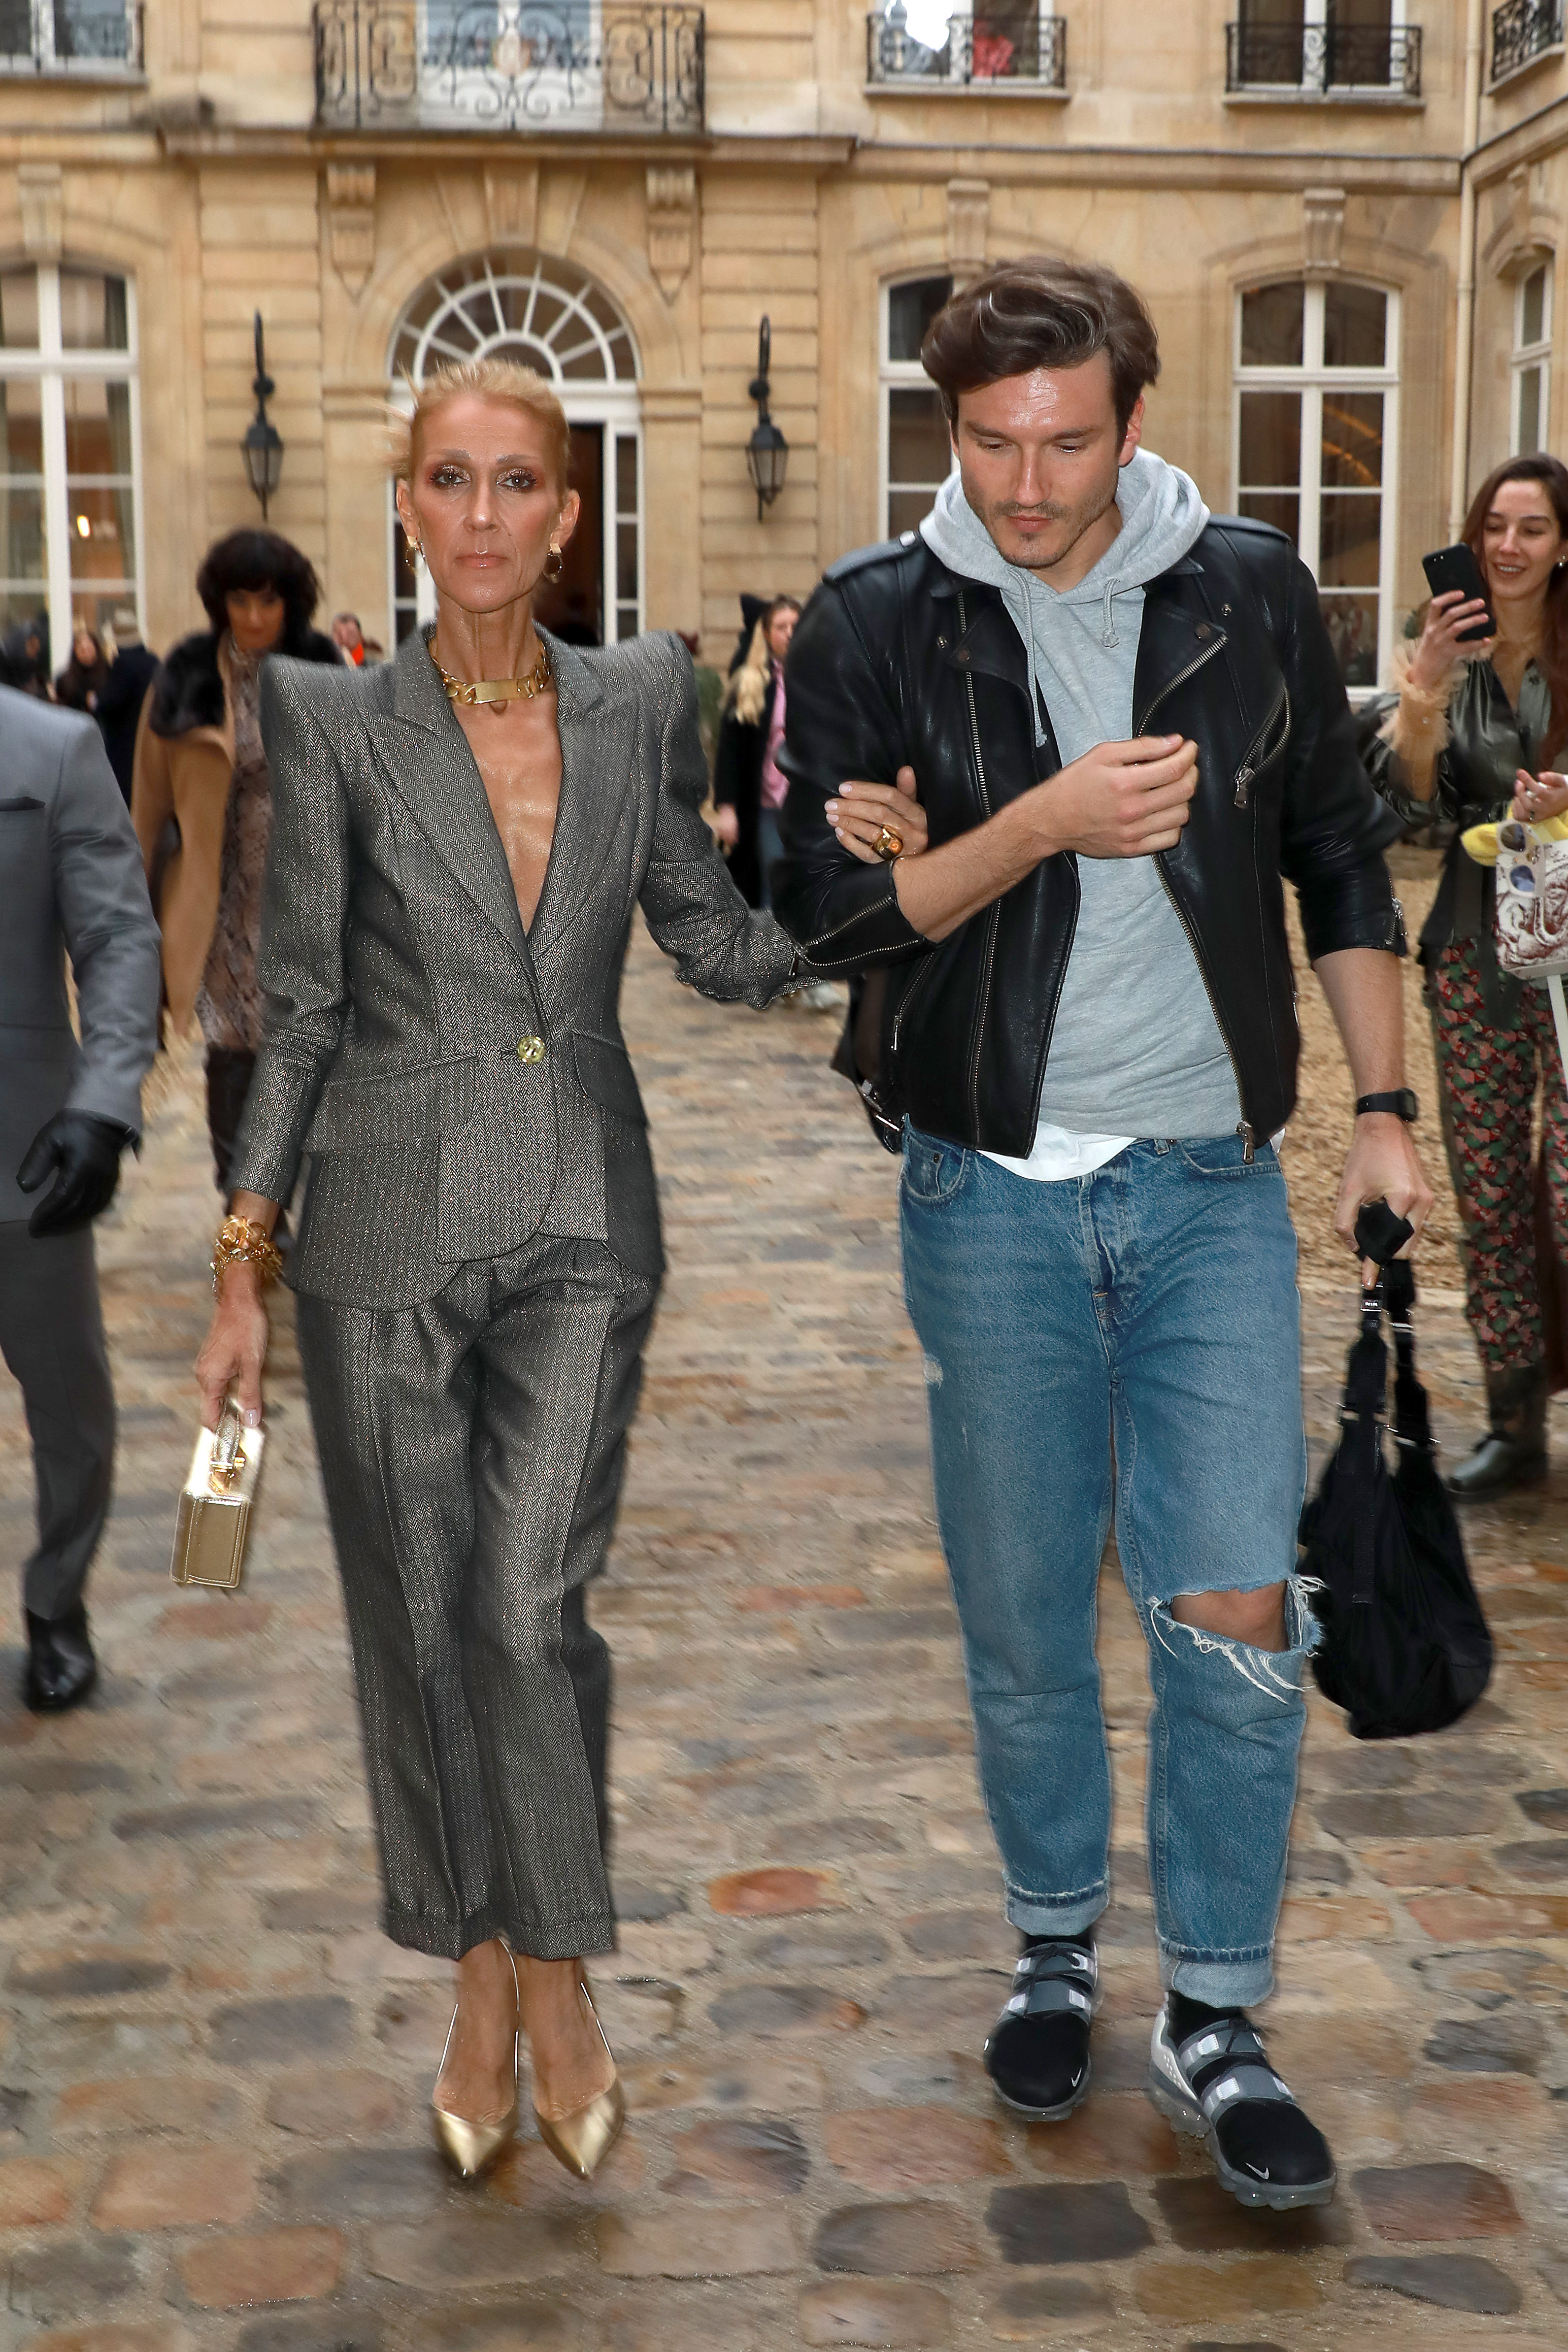 Celine Dion and Pepe Munoz at the RVDK Ronald Van Der Kemp Haute Couture Spring Summer 2019 show on January 23, 2019 in Paris, France. | Source: Getty Images